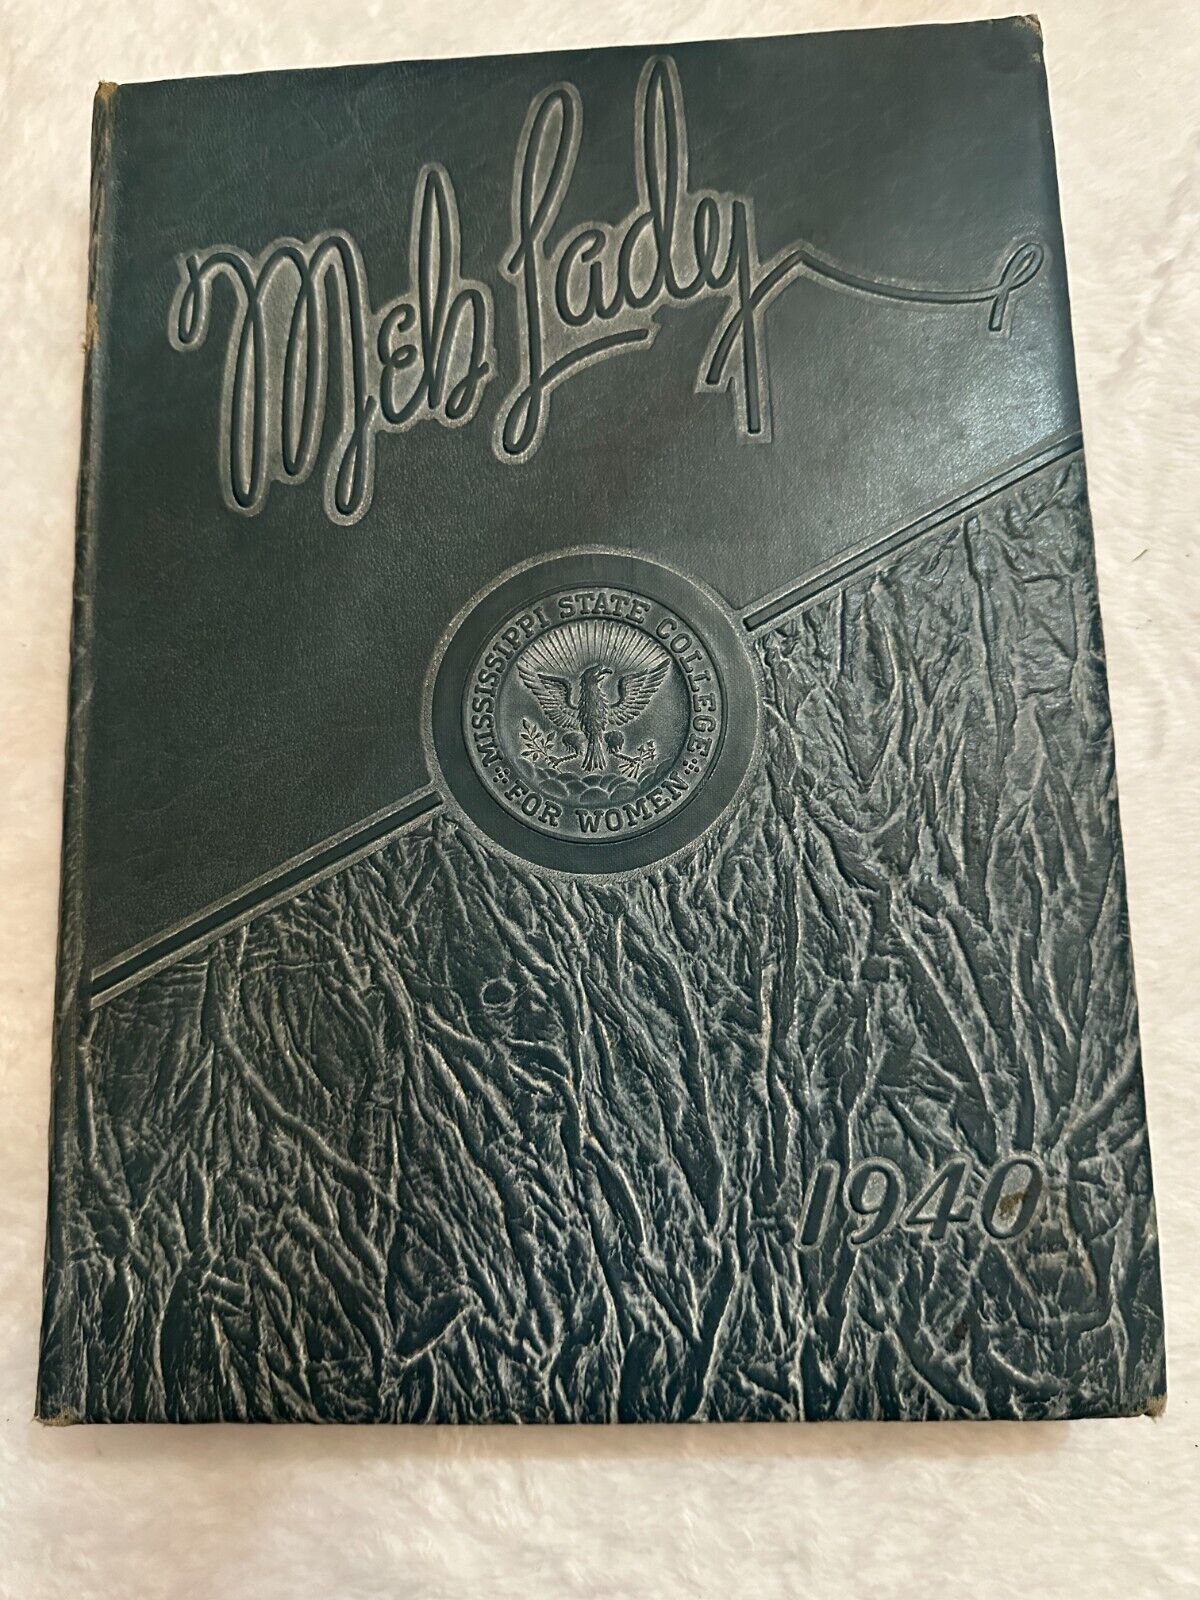 1940 Meh Lady Yearbook - Mississippi State College for Women - MSCW